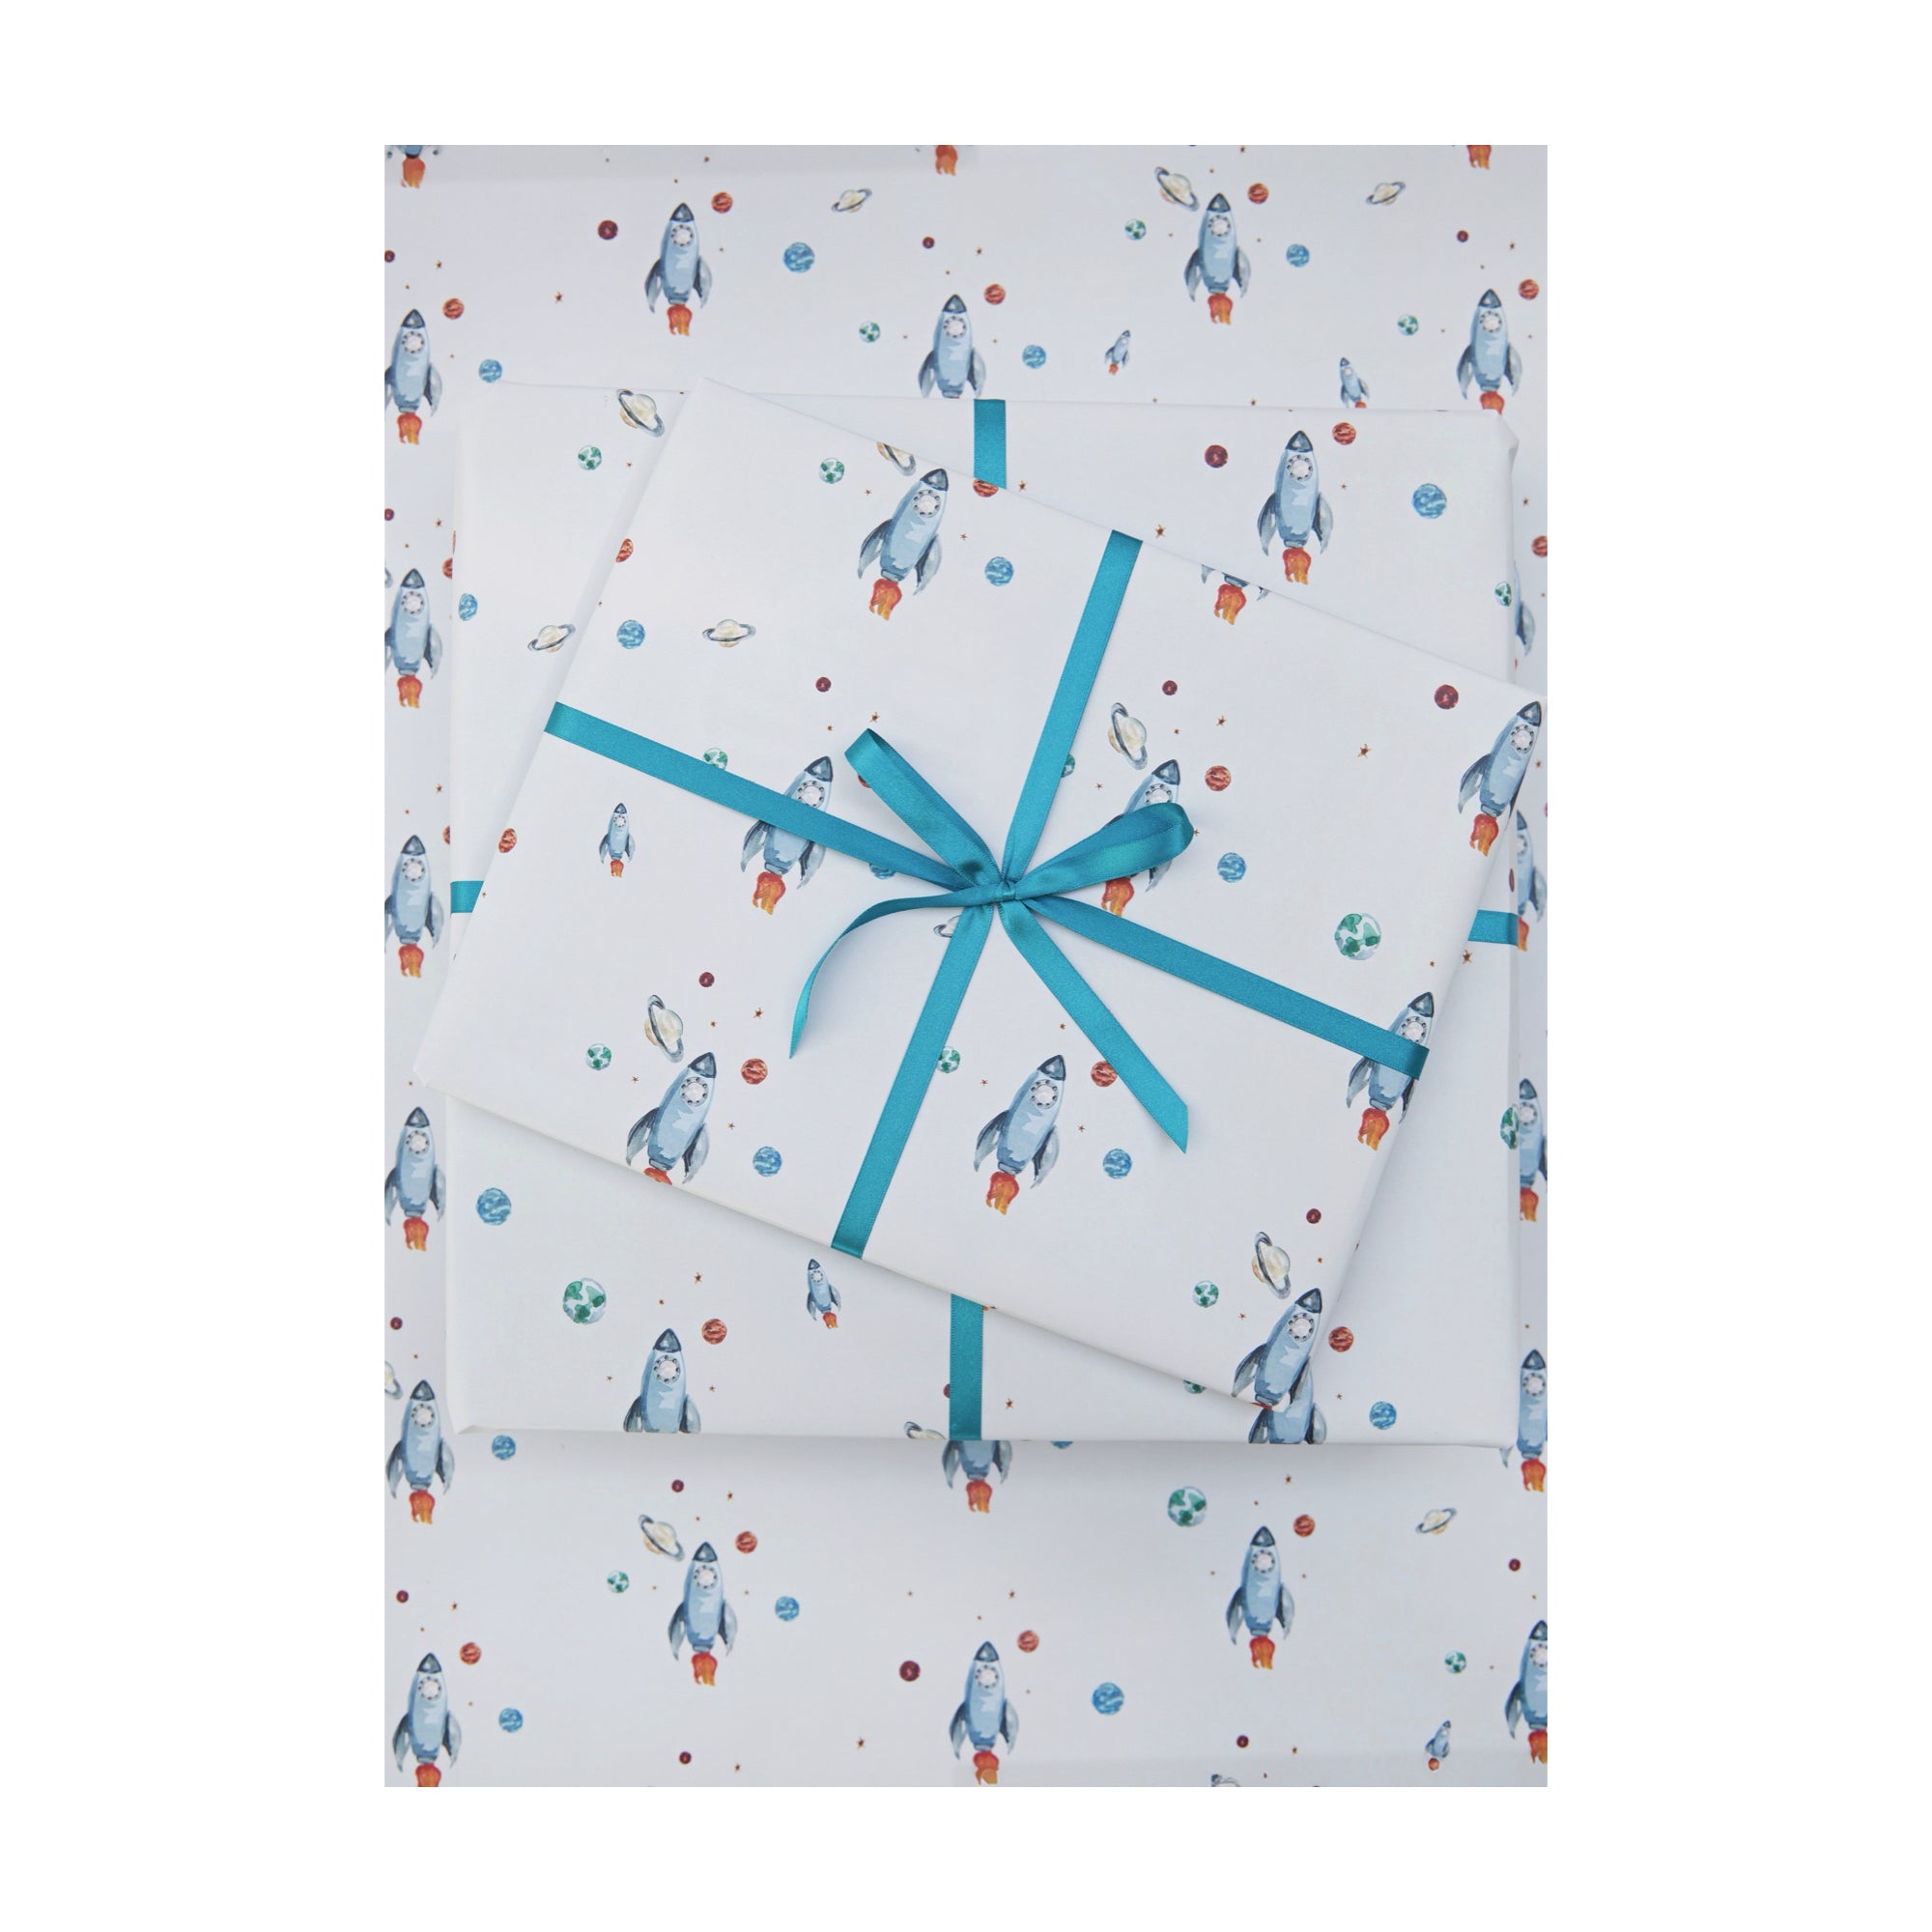 Wrapping paper with watercolour illustrations or rocket ships, planets and stars by Memo Press